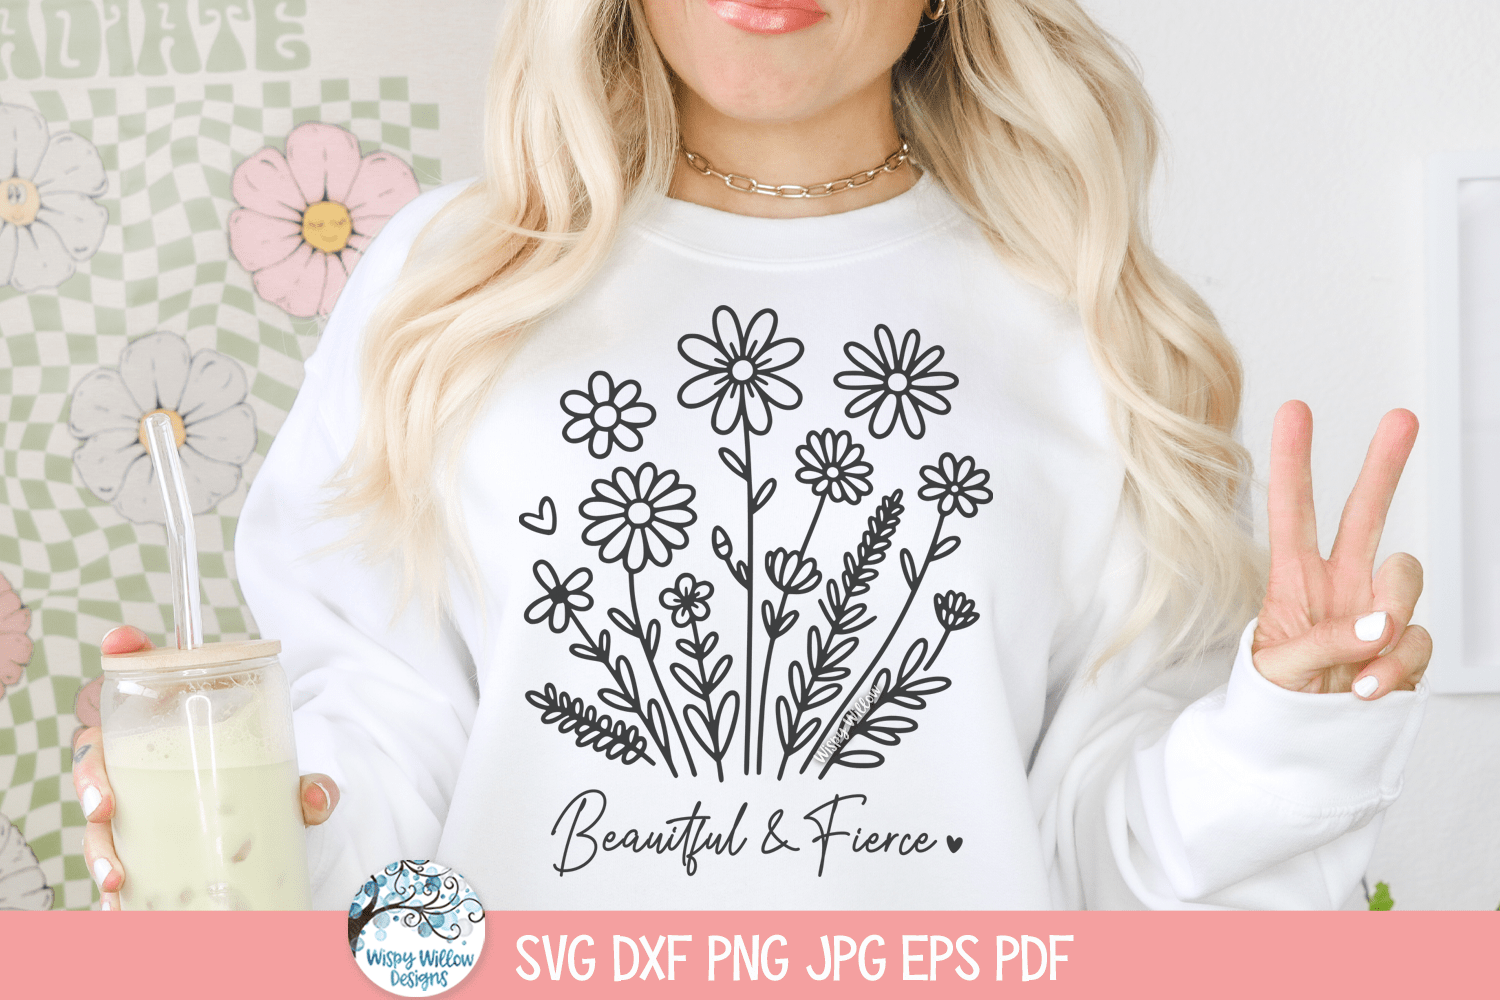 Beautiful And Fierce SVG | Floral Digital Illustration Wispy Willow Designs Company